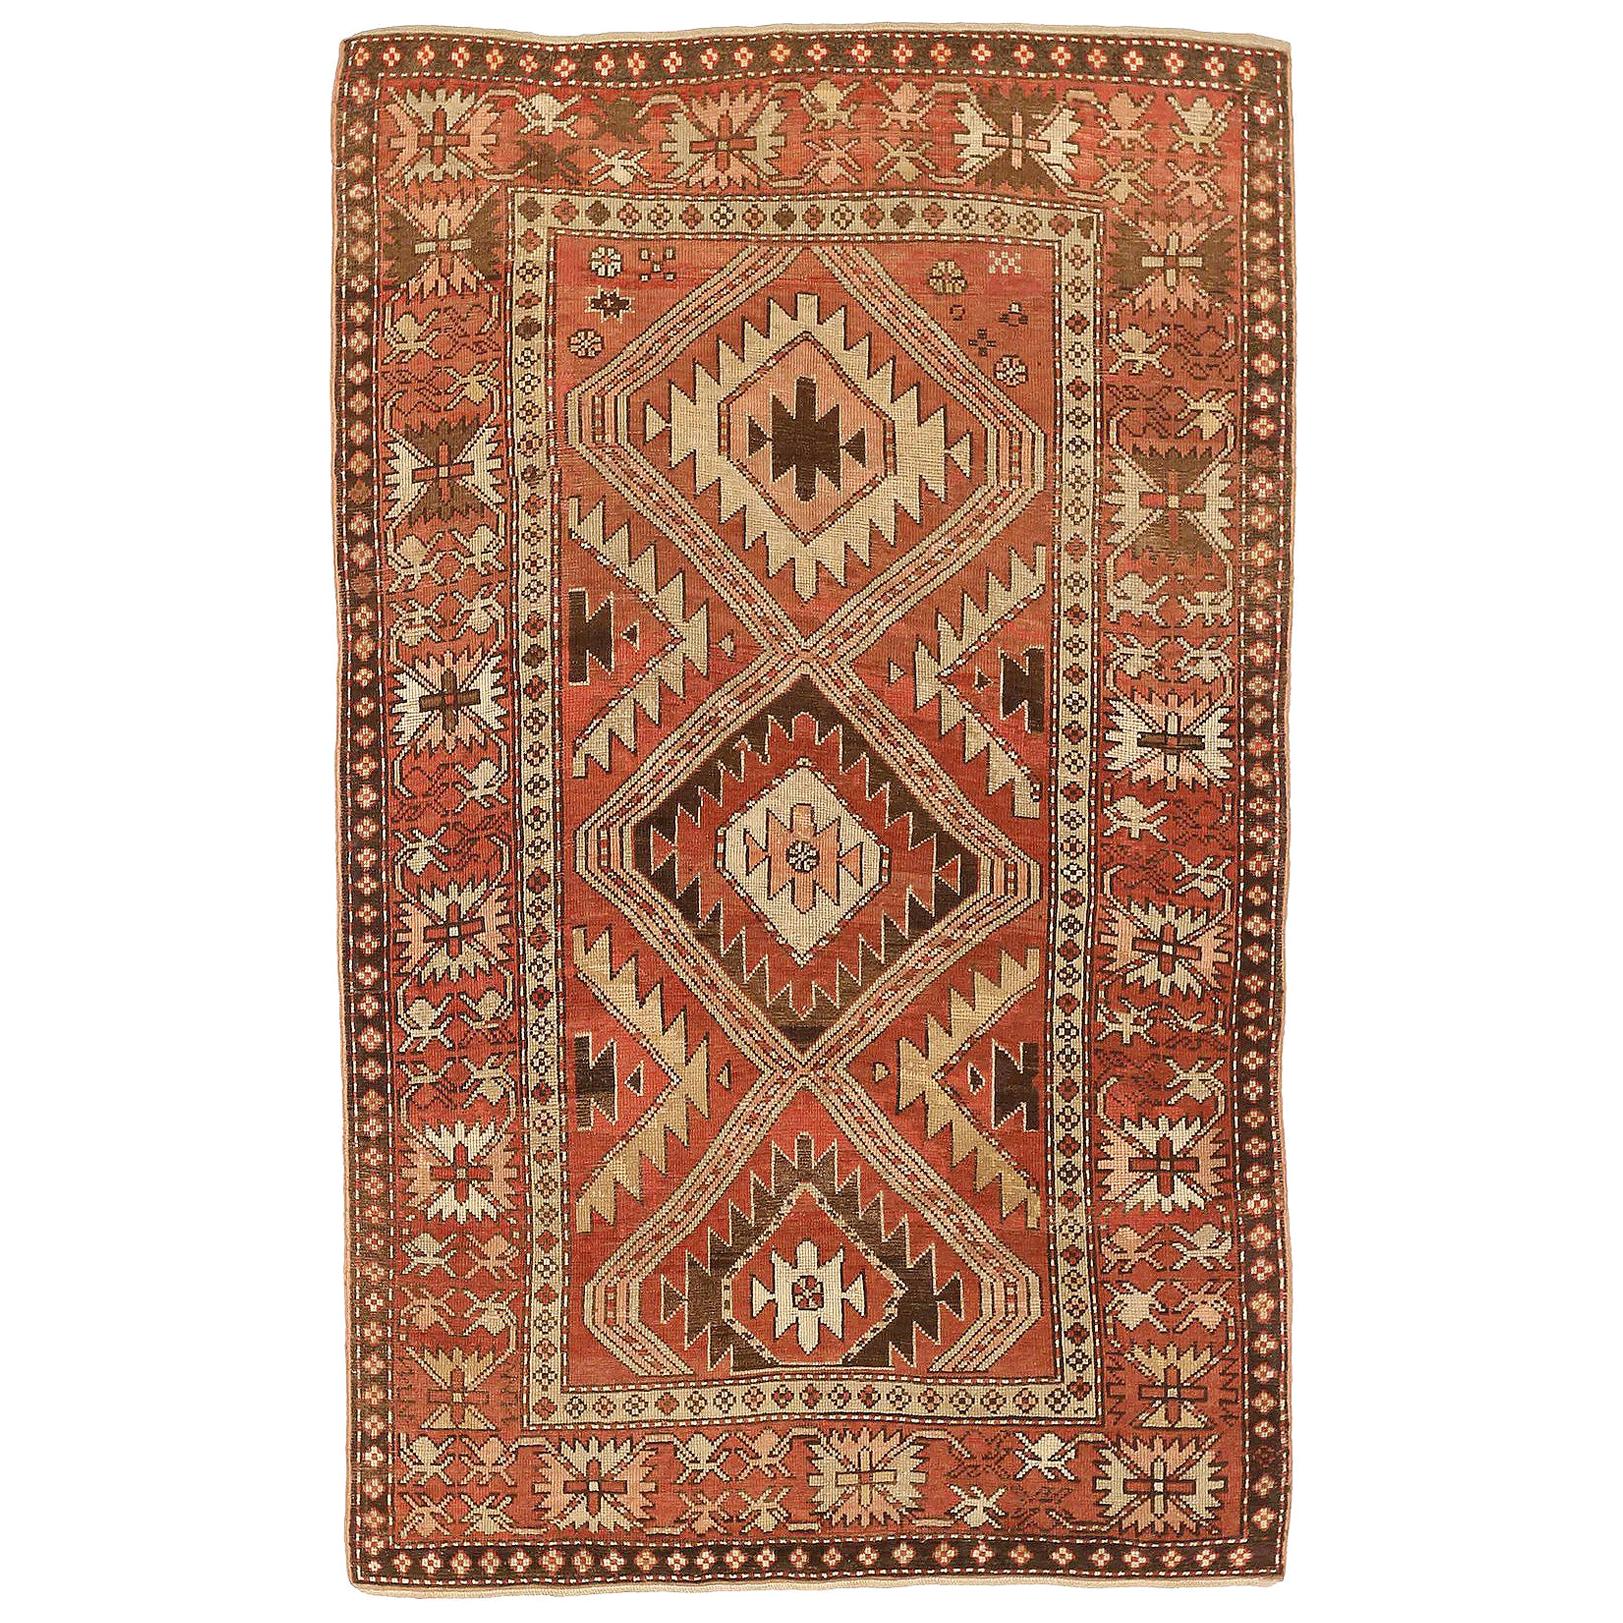 Antique Russian Kazak Rug with Beige and Brown Geometric Medallions